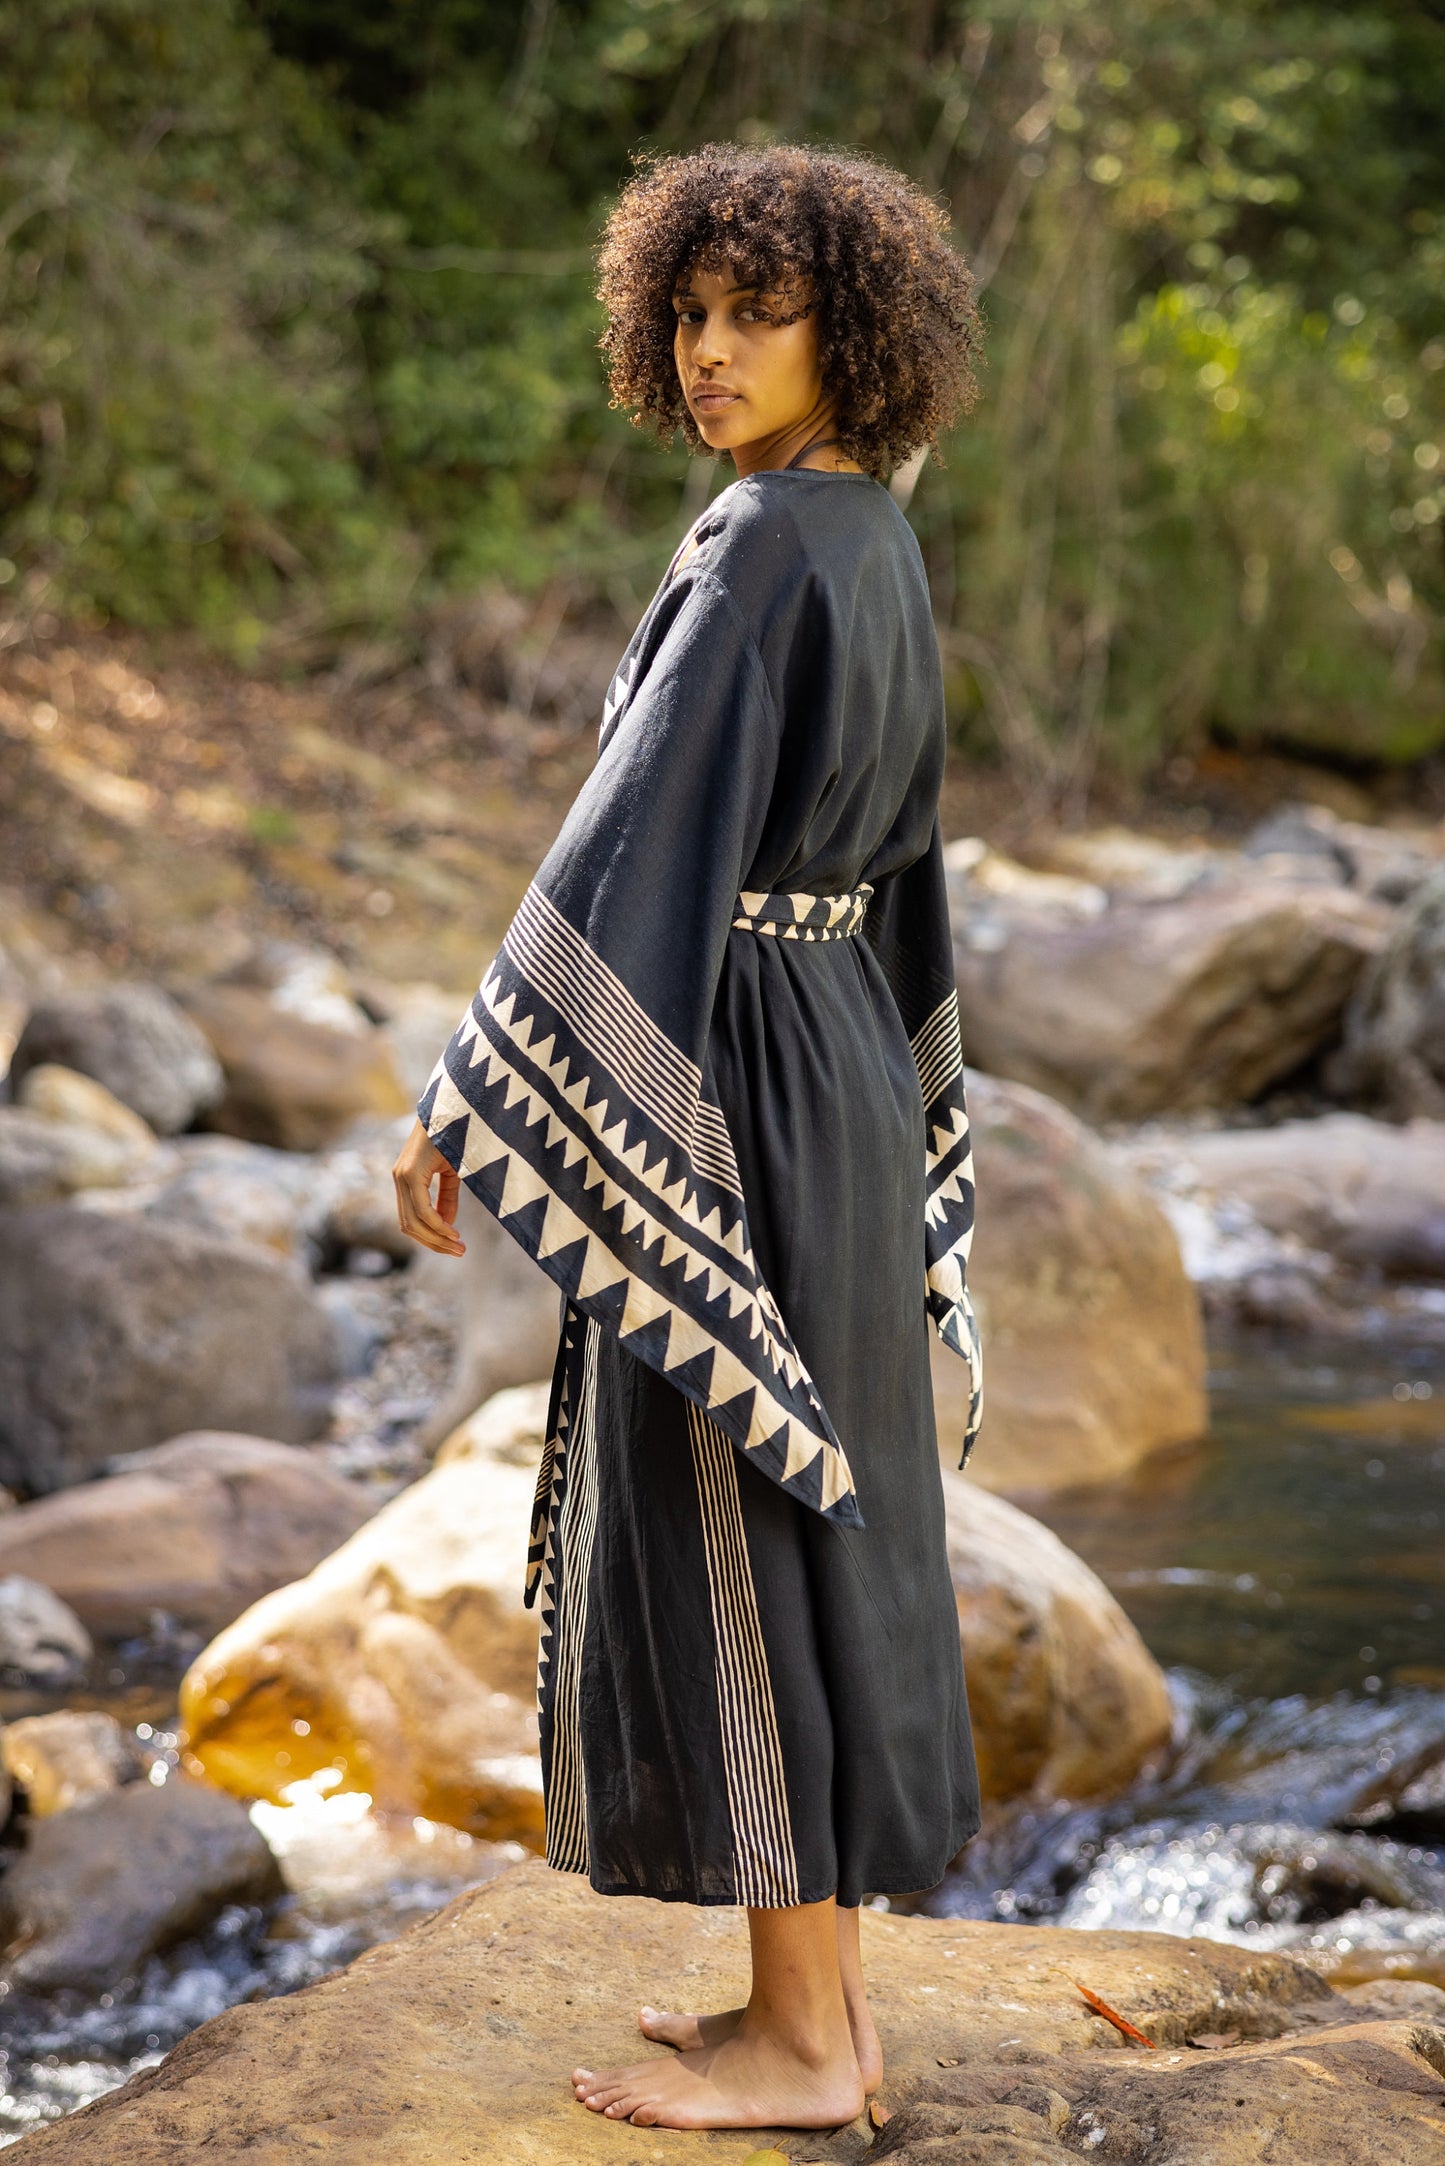 Introducing the ELGA kimono robe, the unique blend of comfort and style. Made from a super soft, breathable rayon-cotton fabric, this robe is designed for ultimate comfort and ease of movement.